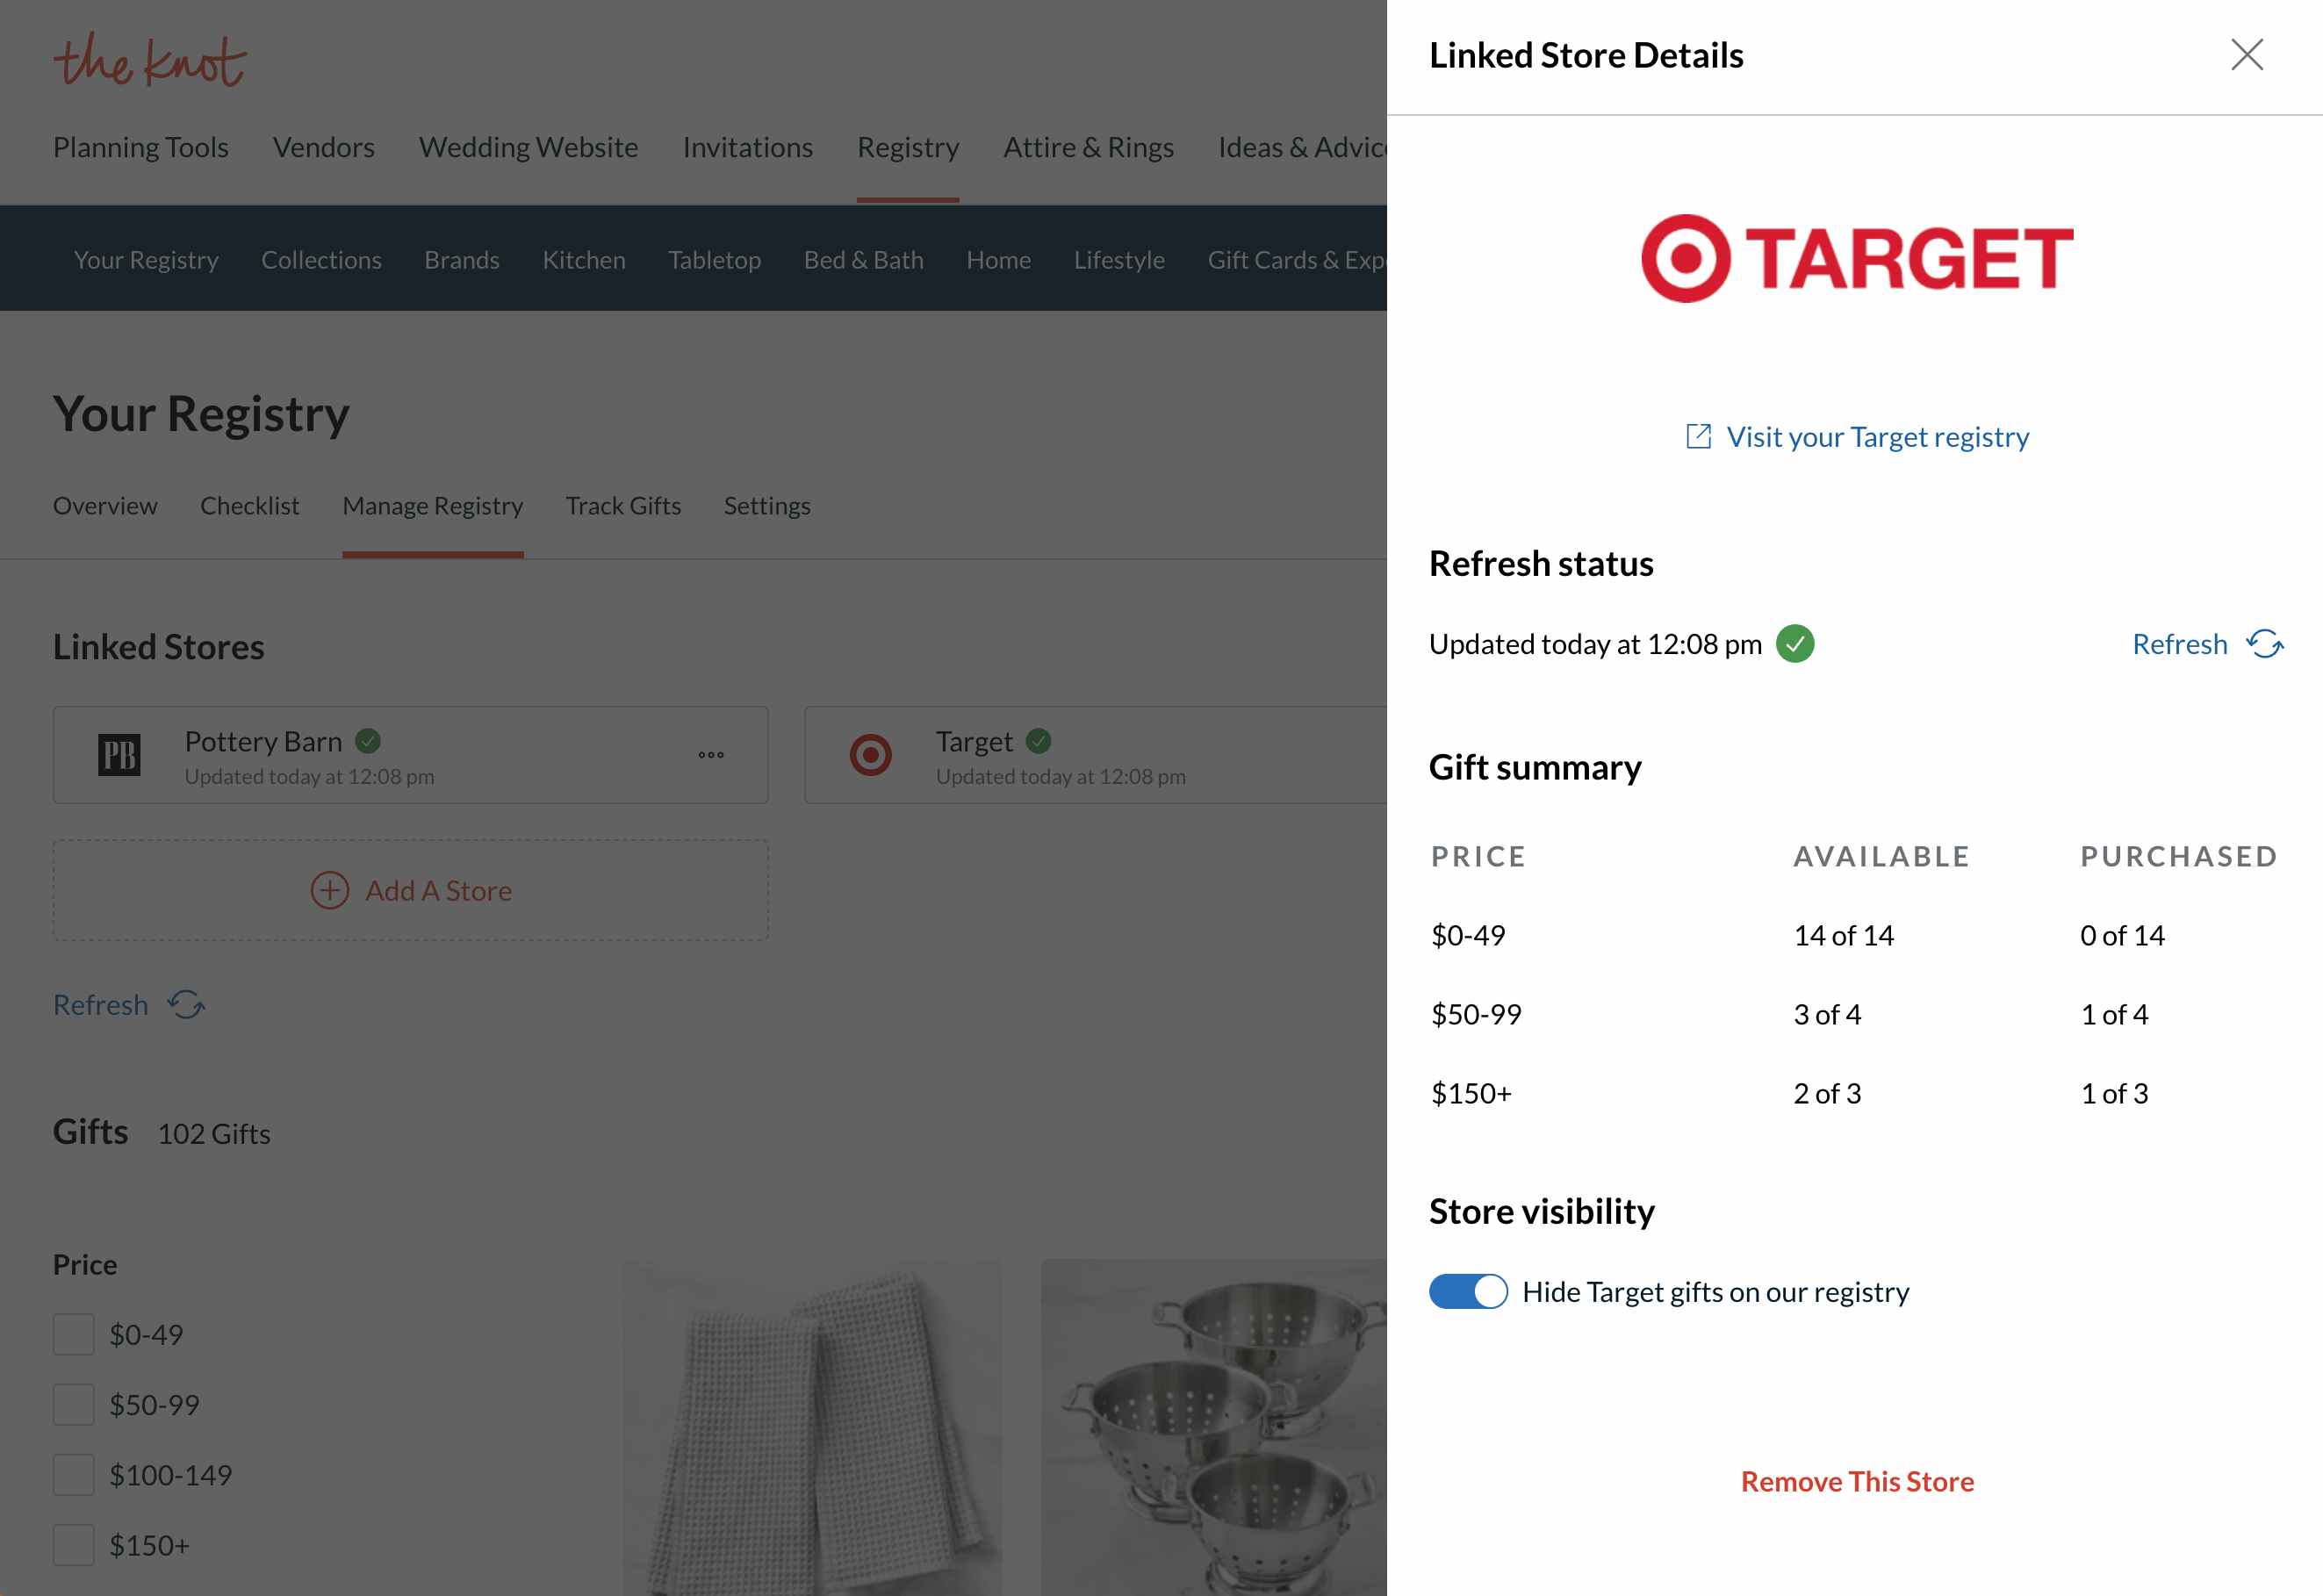 A screenshot of theknot.com registry manager showing Target as a linked store